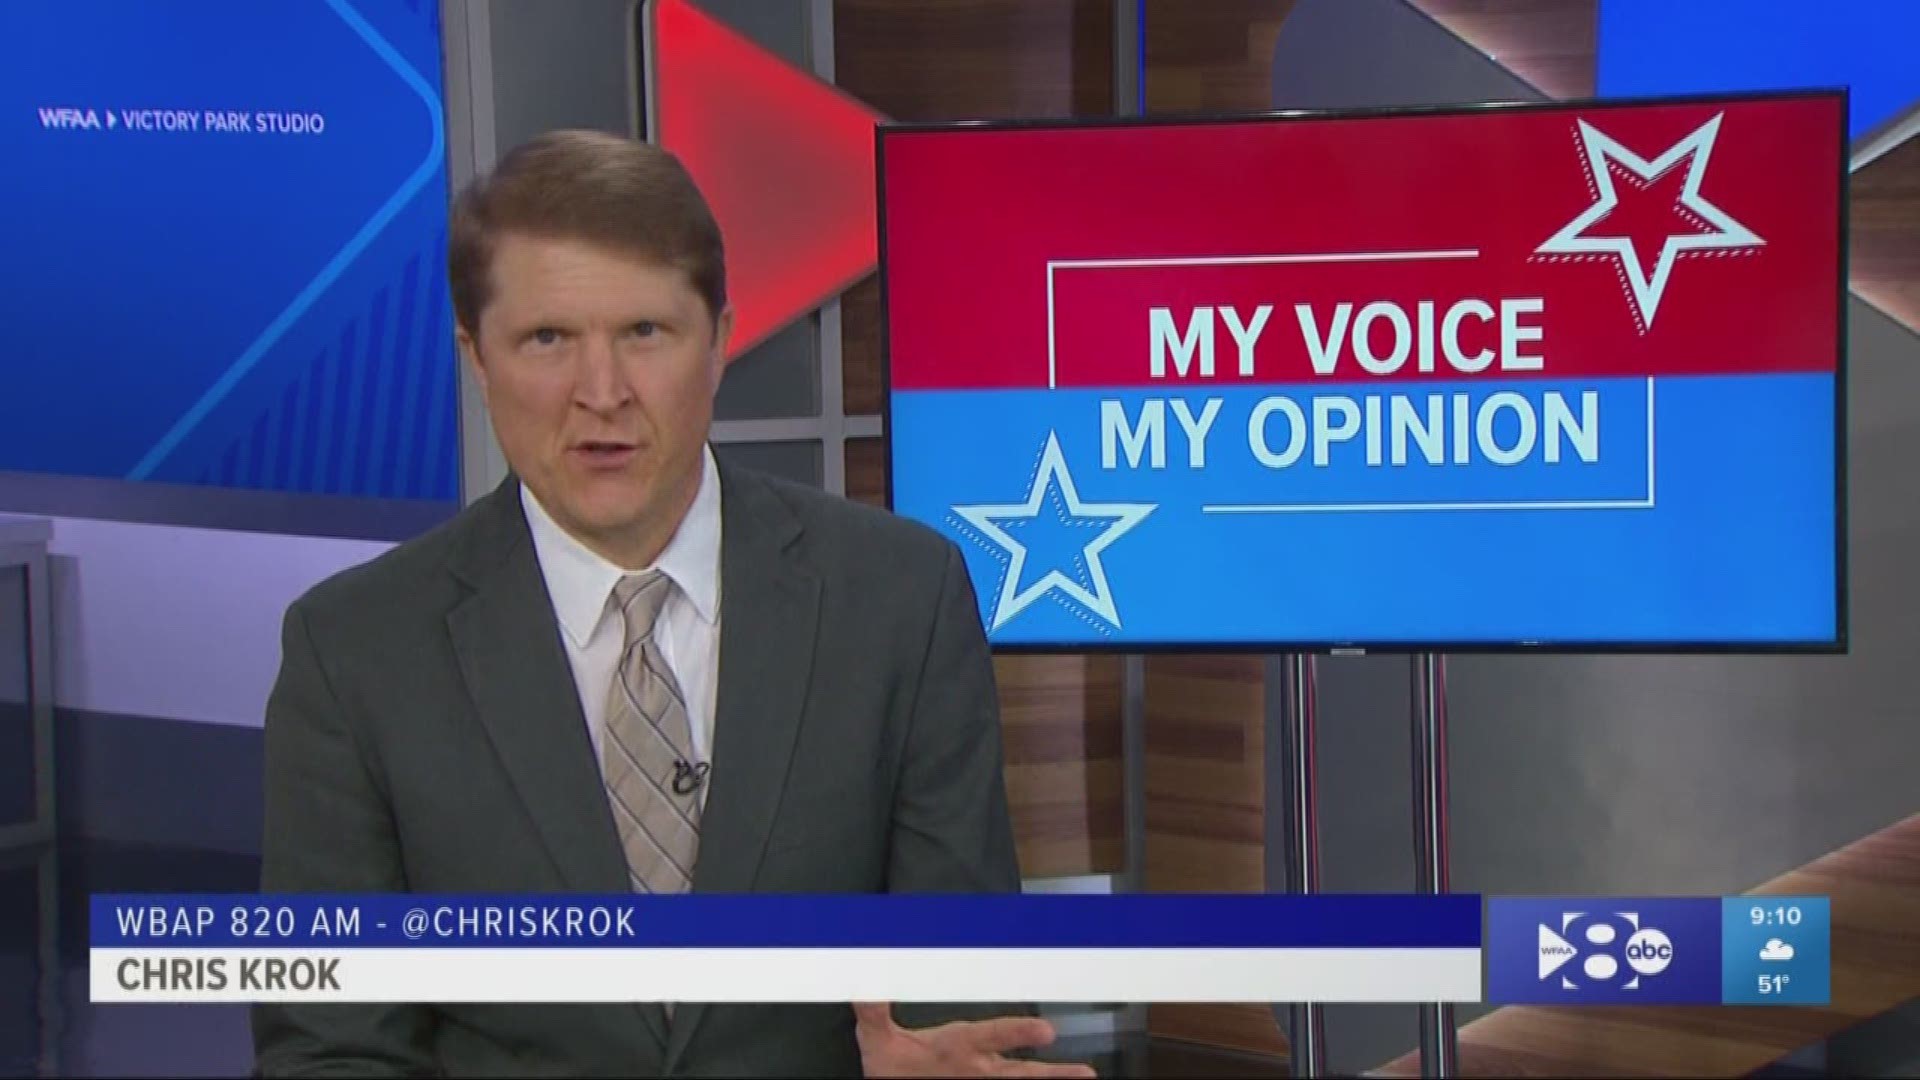 With this week’s My Voice, My Opinion, conservative Chris Krok - from WBAP 820 AM – claims Democrats used the wrong strategy in the impeachment process.